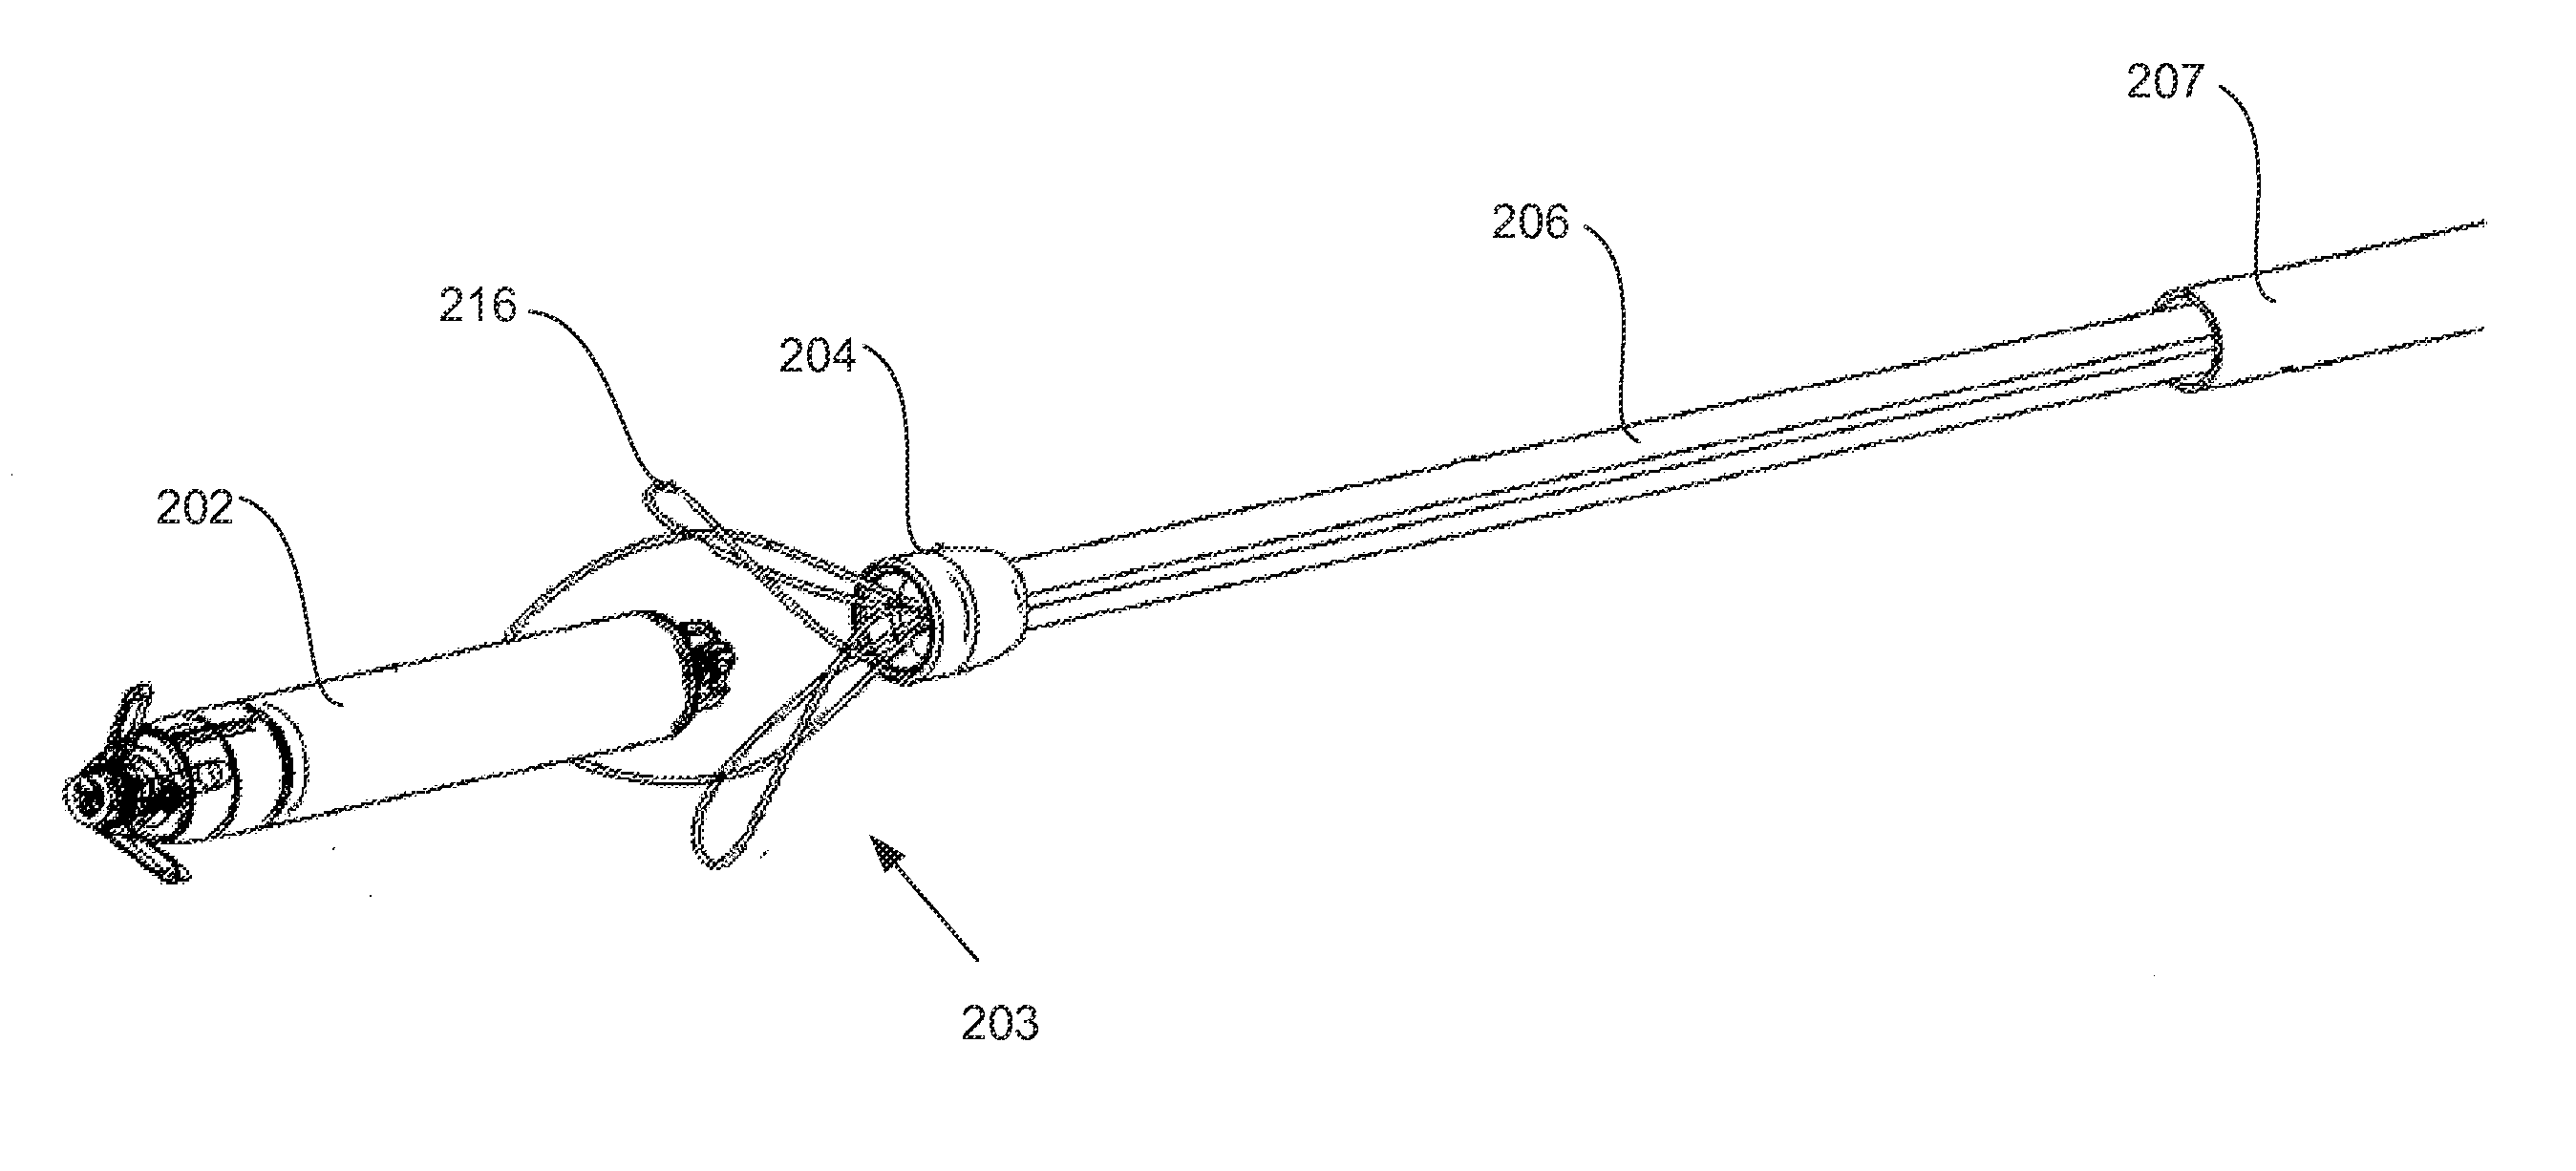 Pacemaker Retrieval Systems and Methods